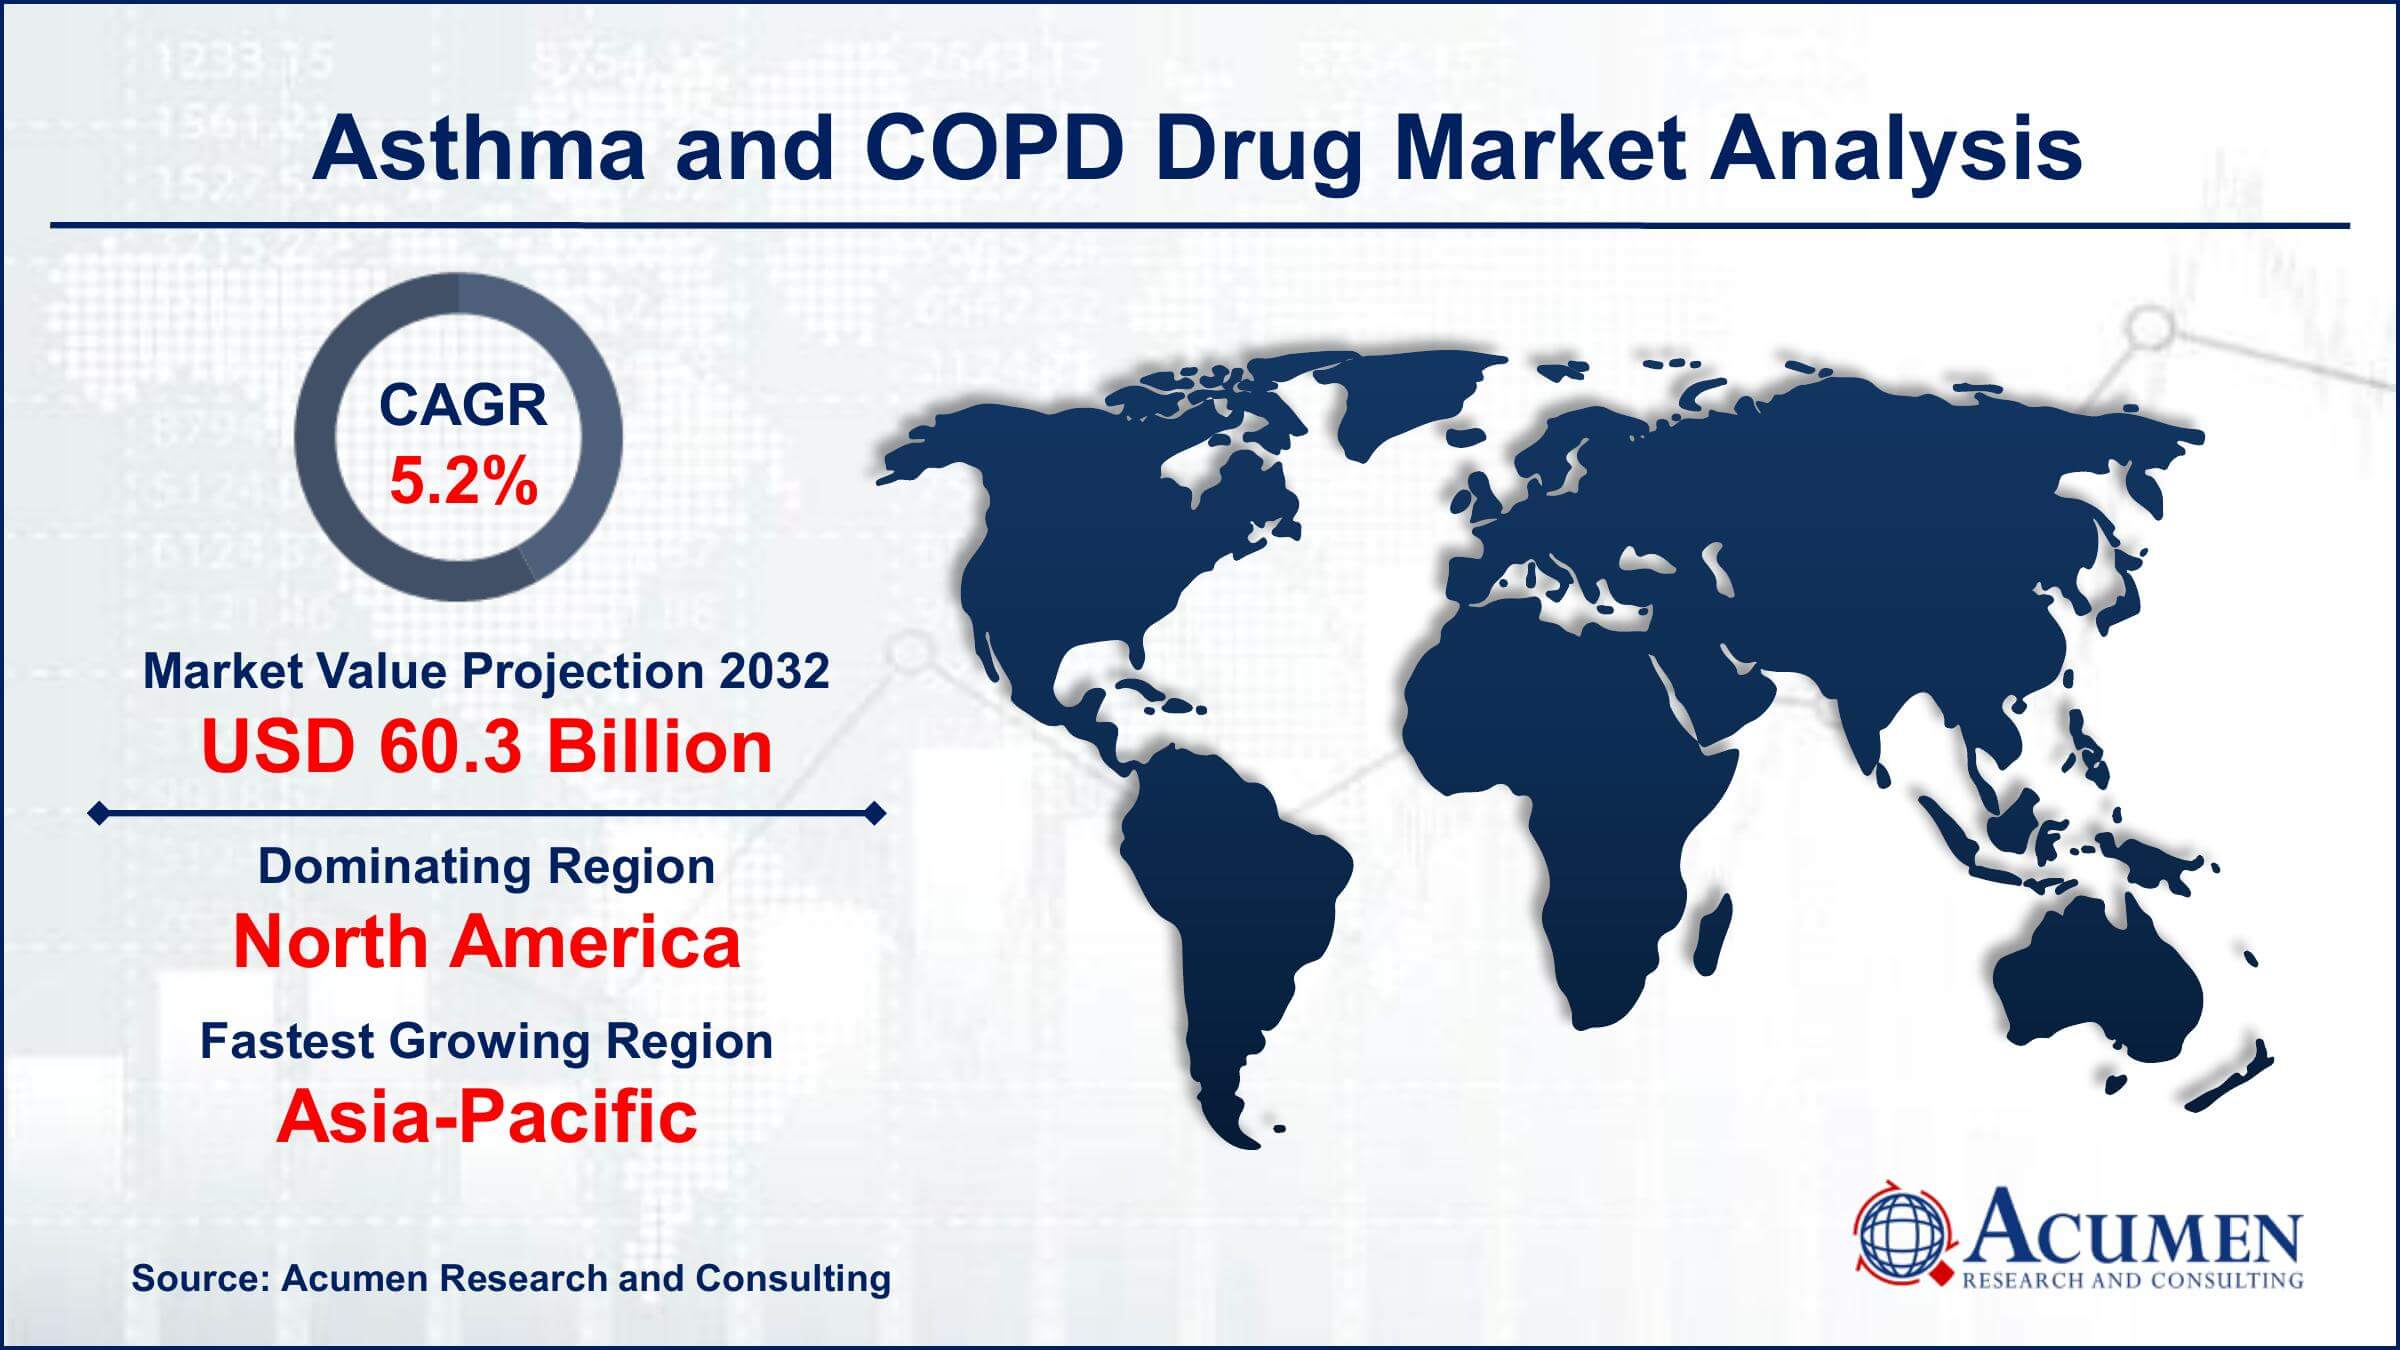 Global Asthma and COPD Drug Market Trends